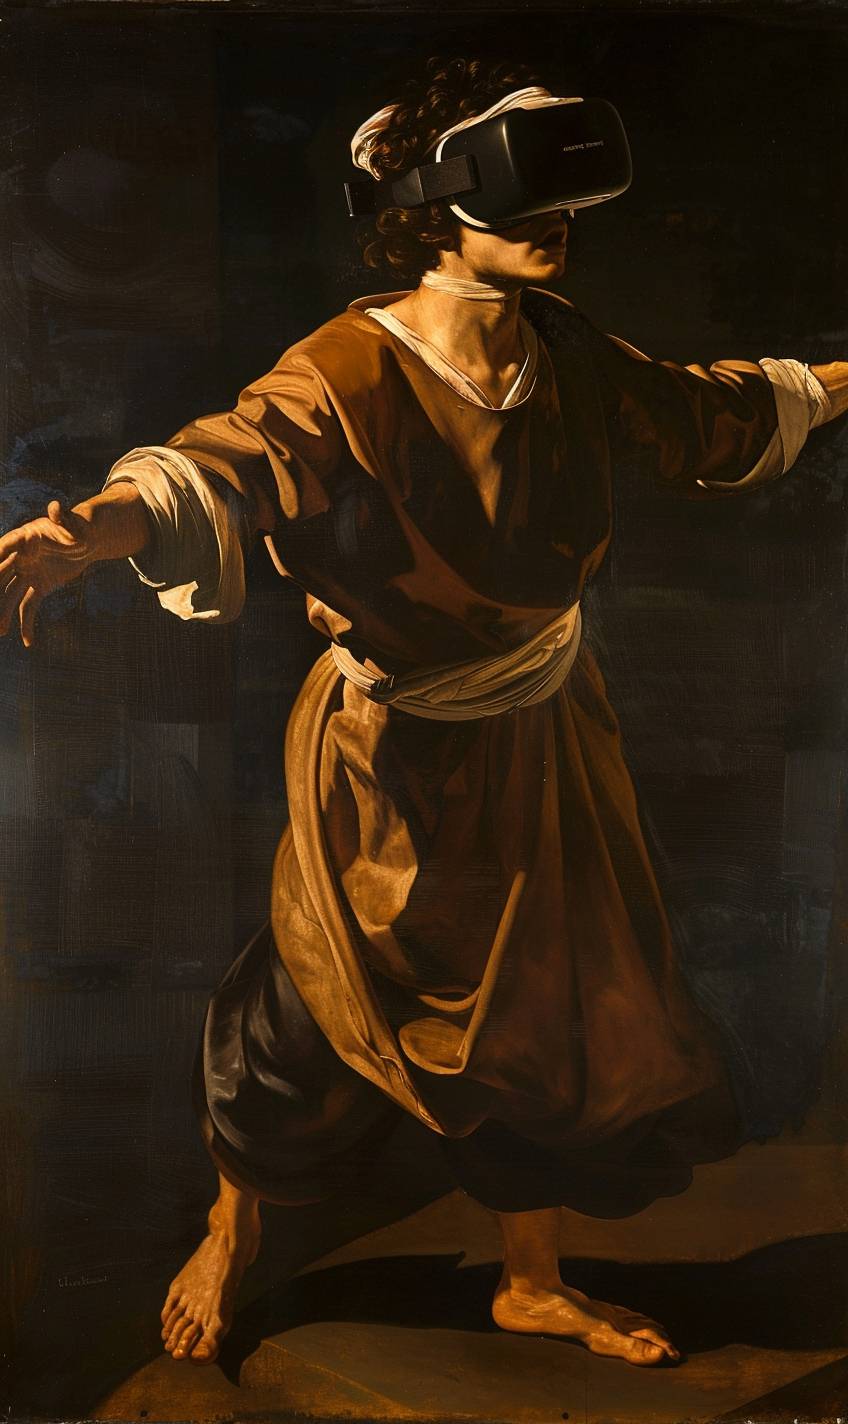 Caravaggio's painting depicting VR headset